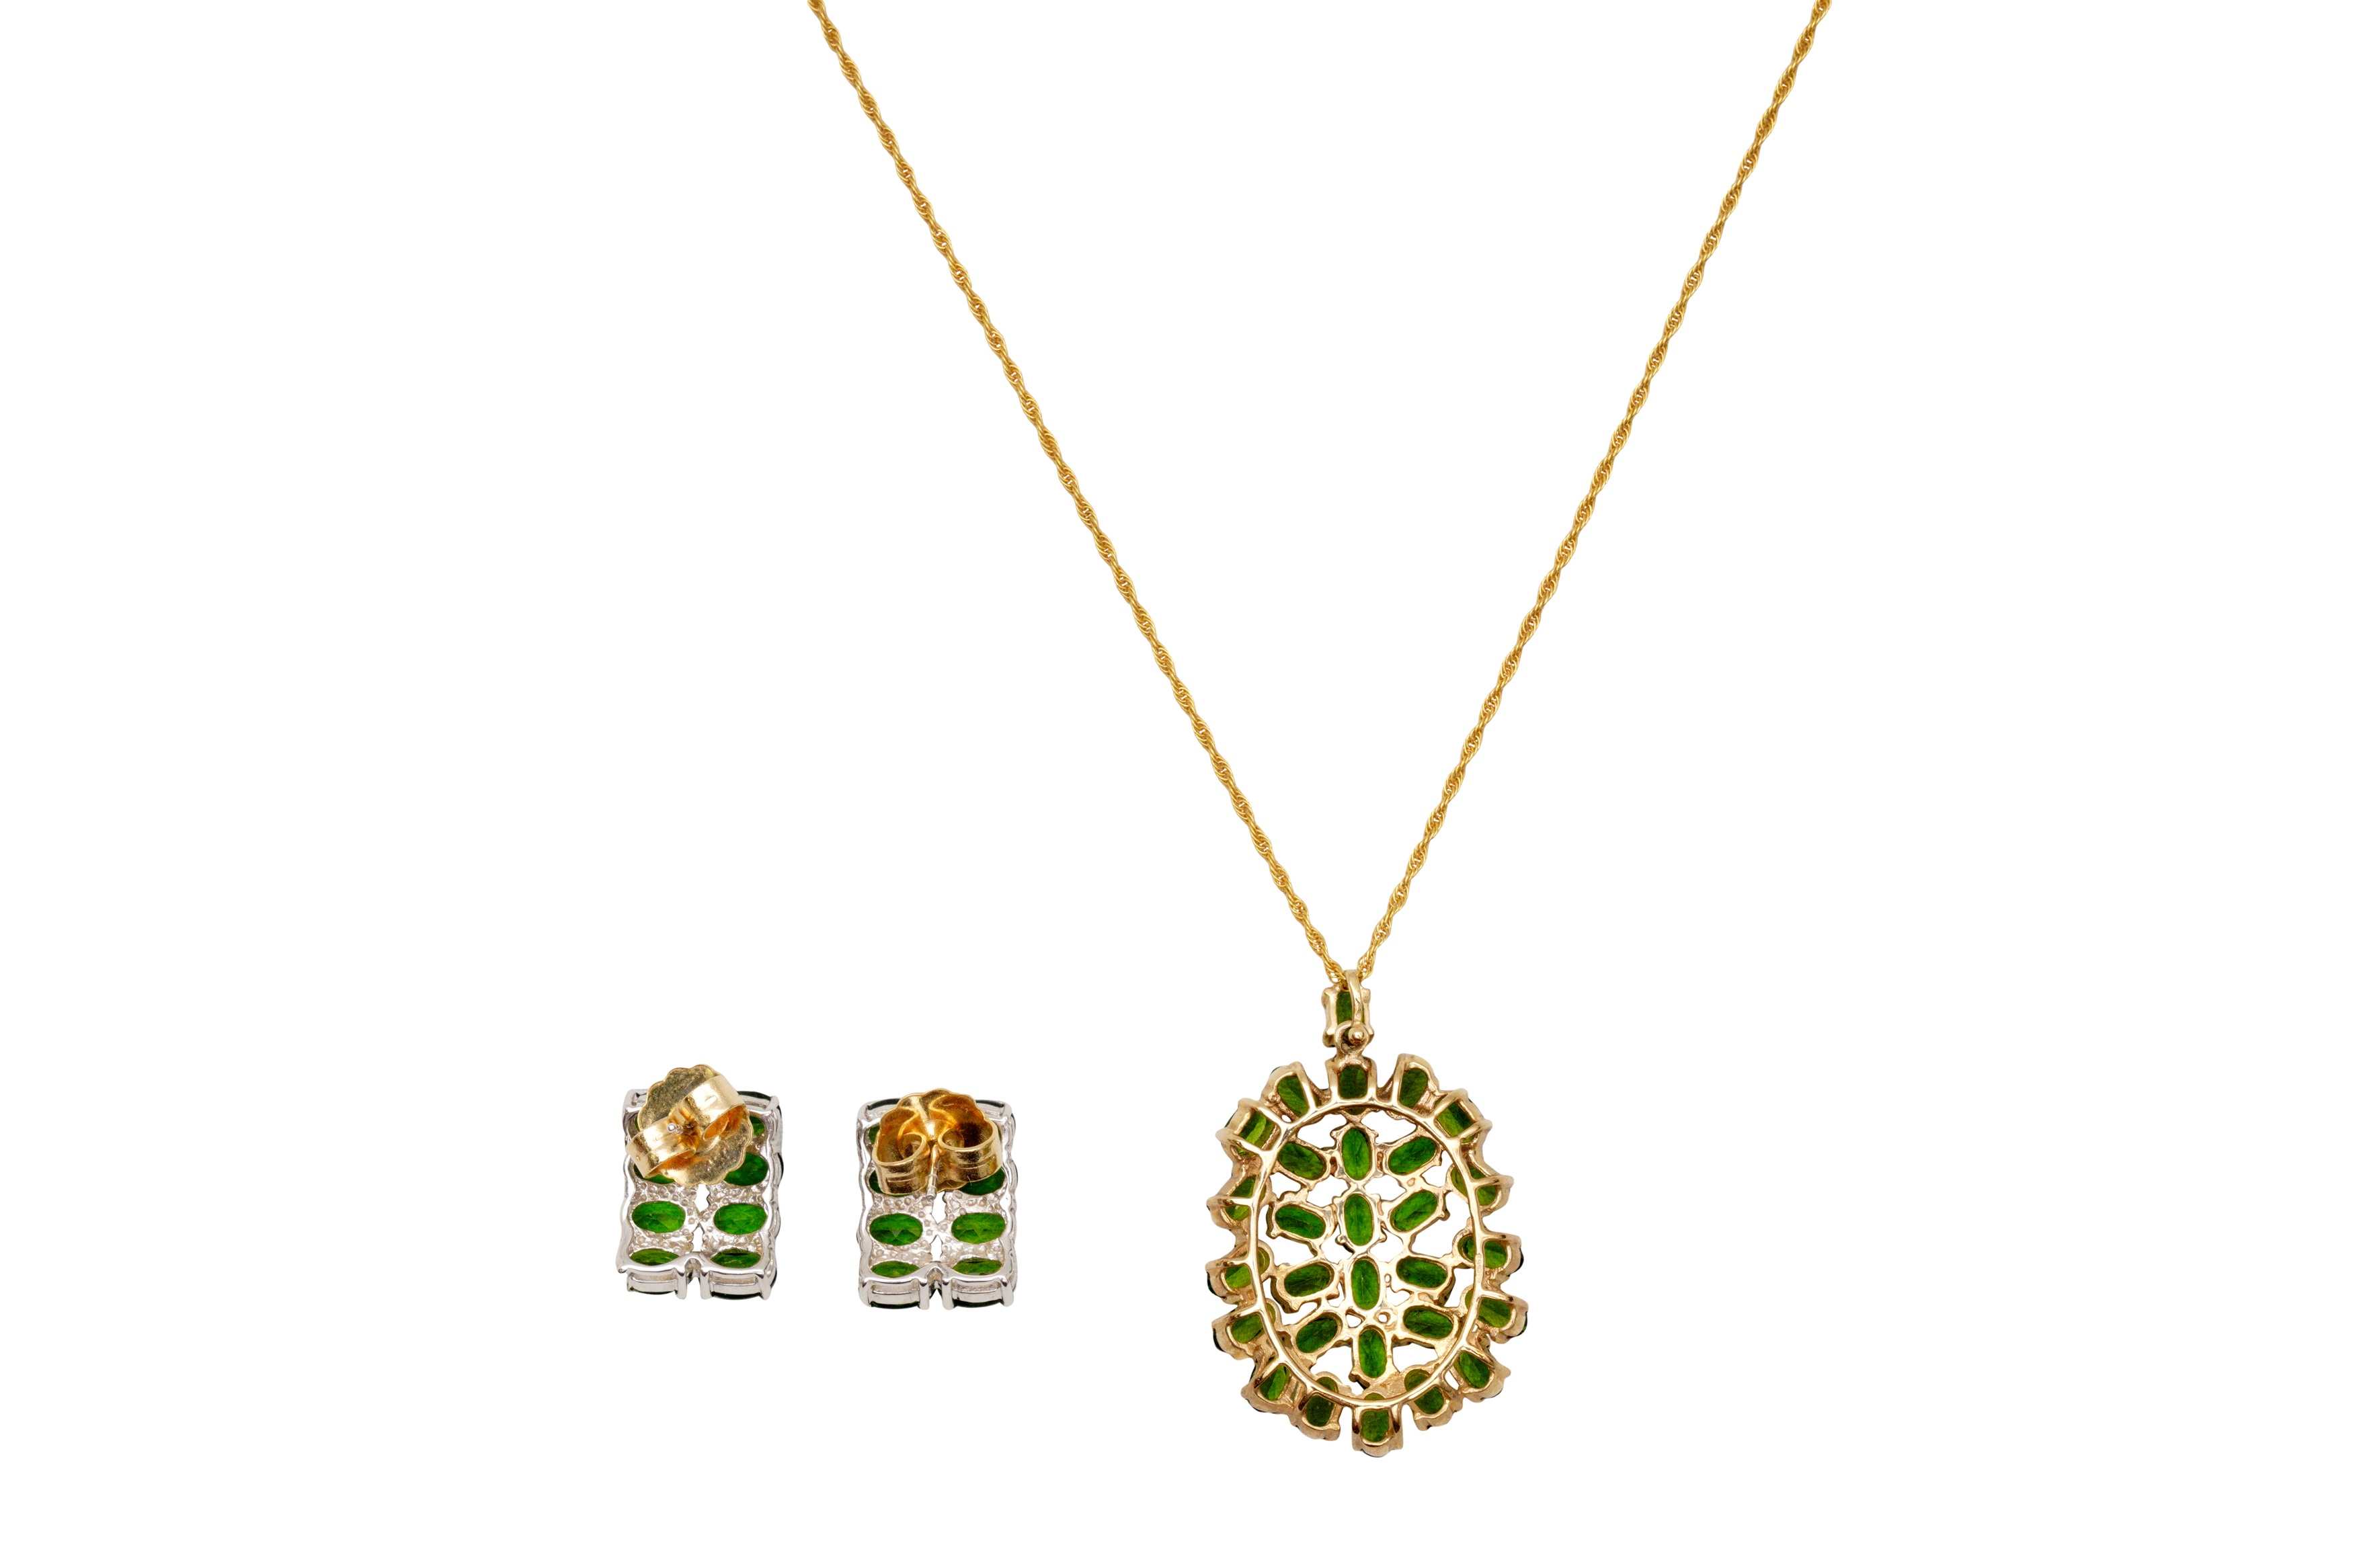 A 9CT GOLD DIOPSIDE PENDANT NECKLACE AND EARRINGS - Image 3 of 3